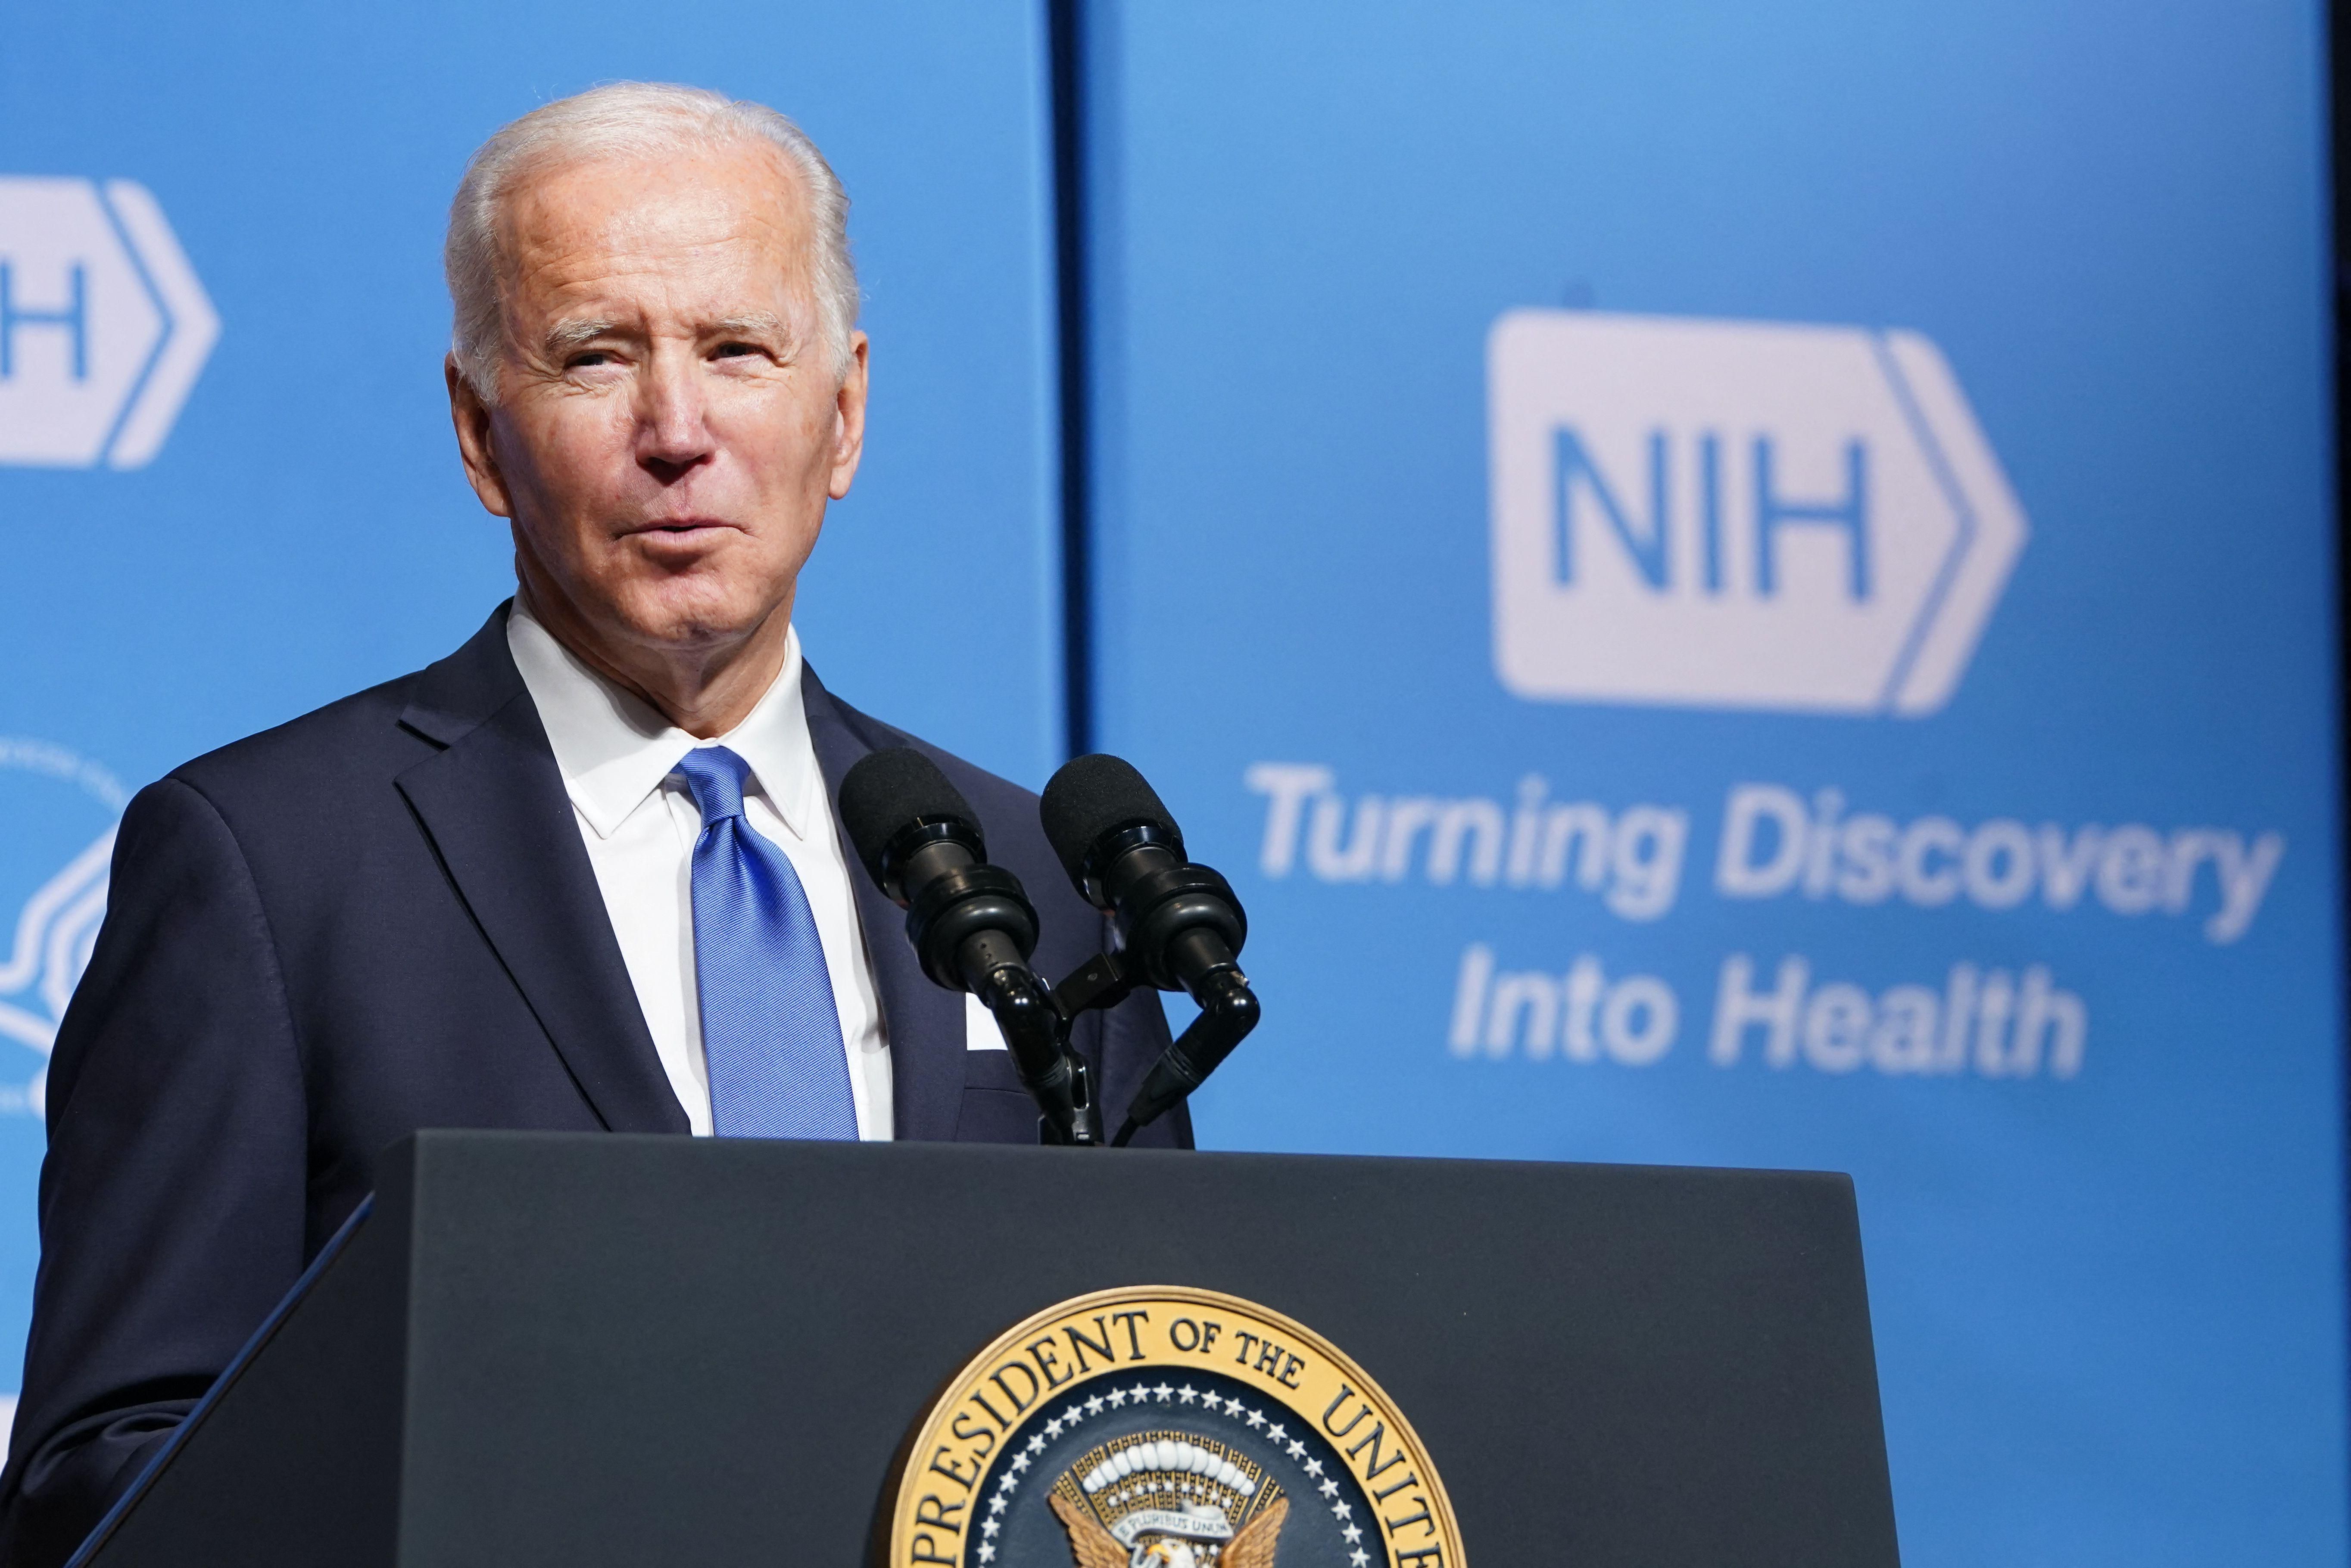 U.S. President Joe Biden speaks about his administration's response to the Omicron variant at the National Institutes of Health (NIH) in Bethesda, Maryland on December 2, 2021.